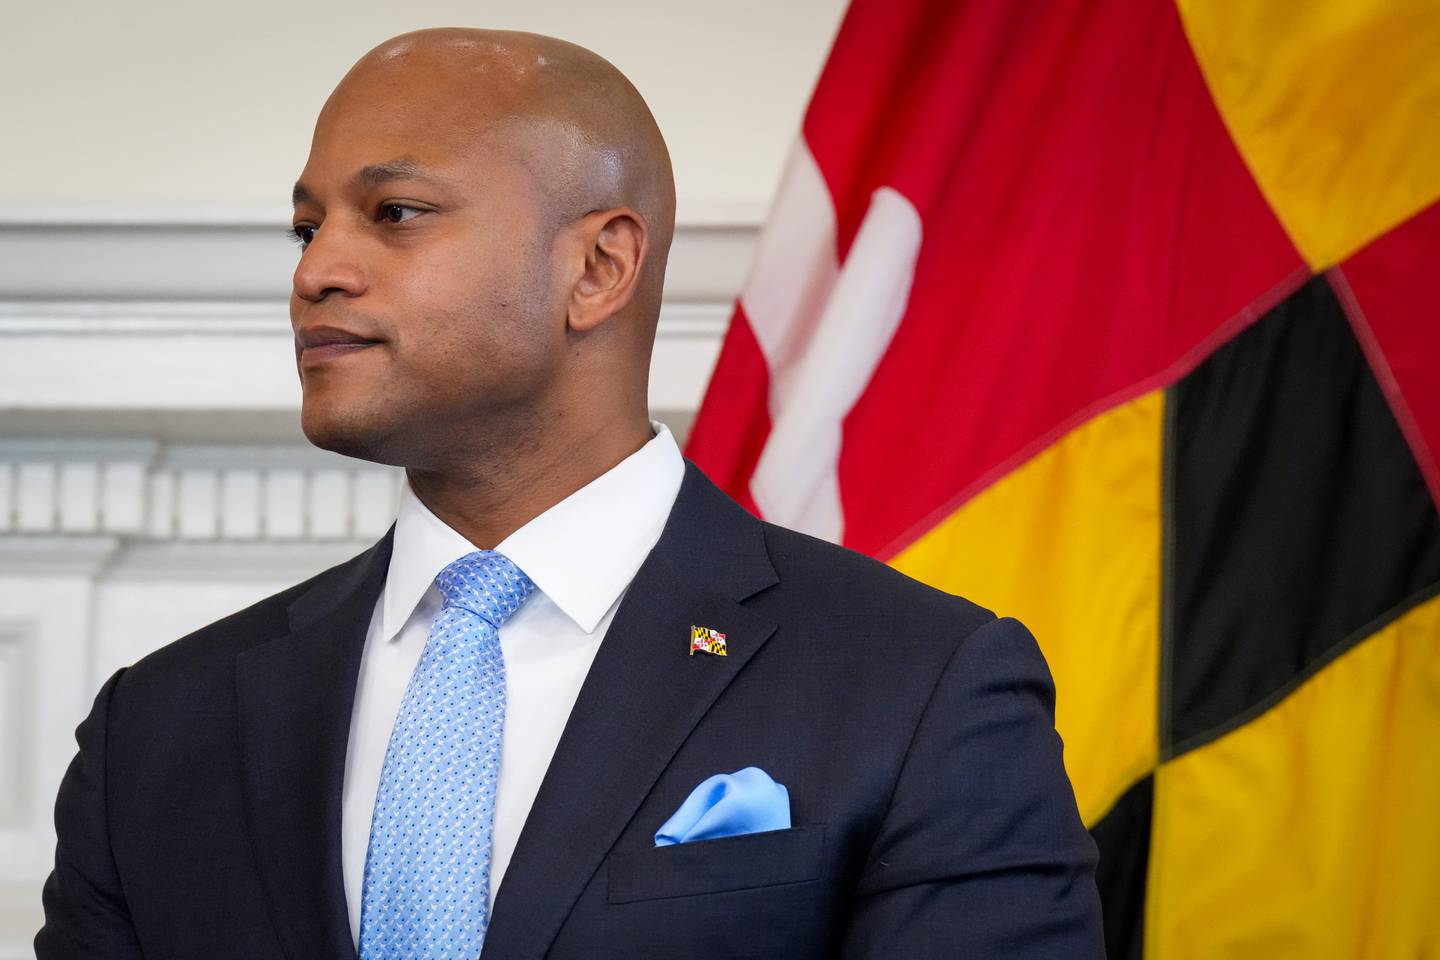 Gov. Wes Moore listens as Paul Monteiro, his pick for Secretary of the Department of Service and Civic Innovation, address the room at a press conference in the Maryland State House.on Monday, April 3. Moore issued an executive order creating the cabinet-level department on his first full day in office in January.